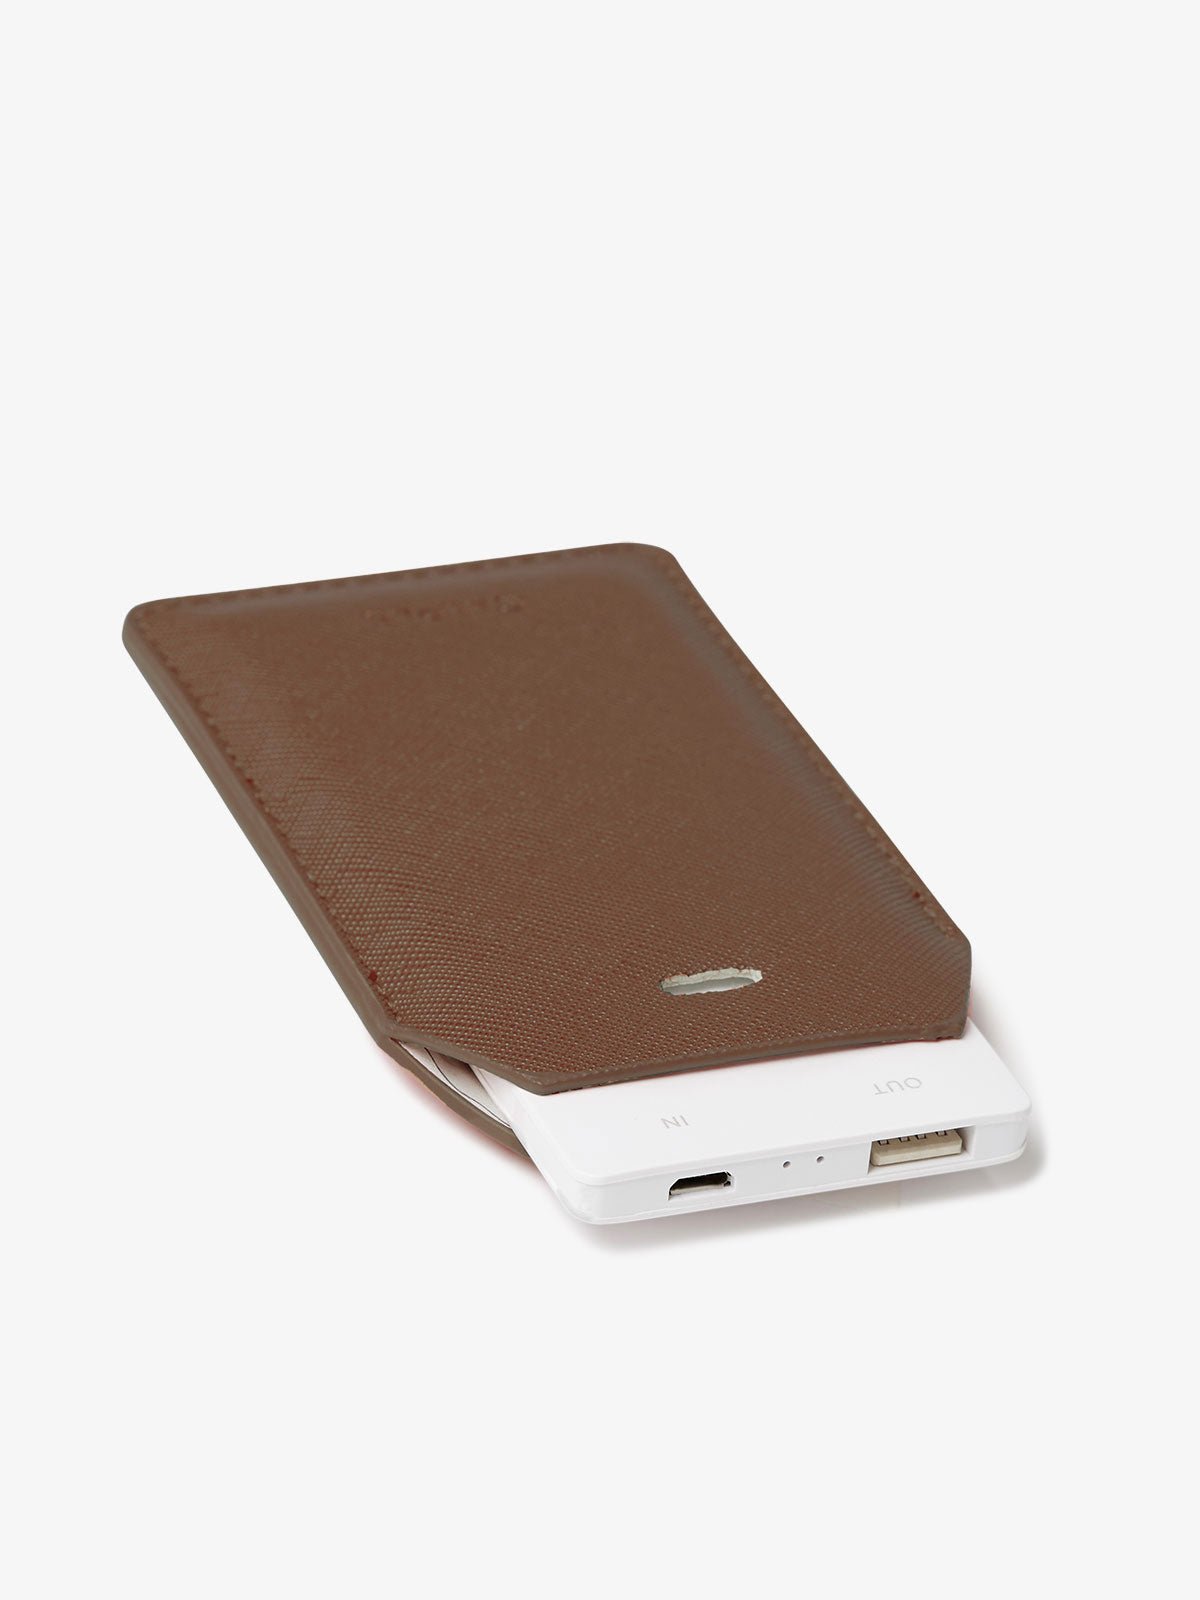 CALPAK luggage tag charger in mocha